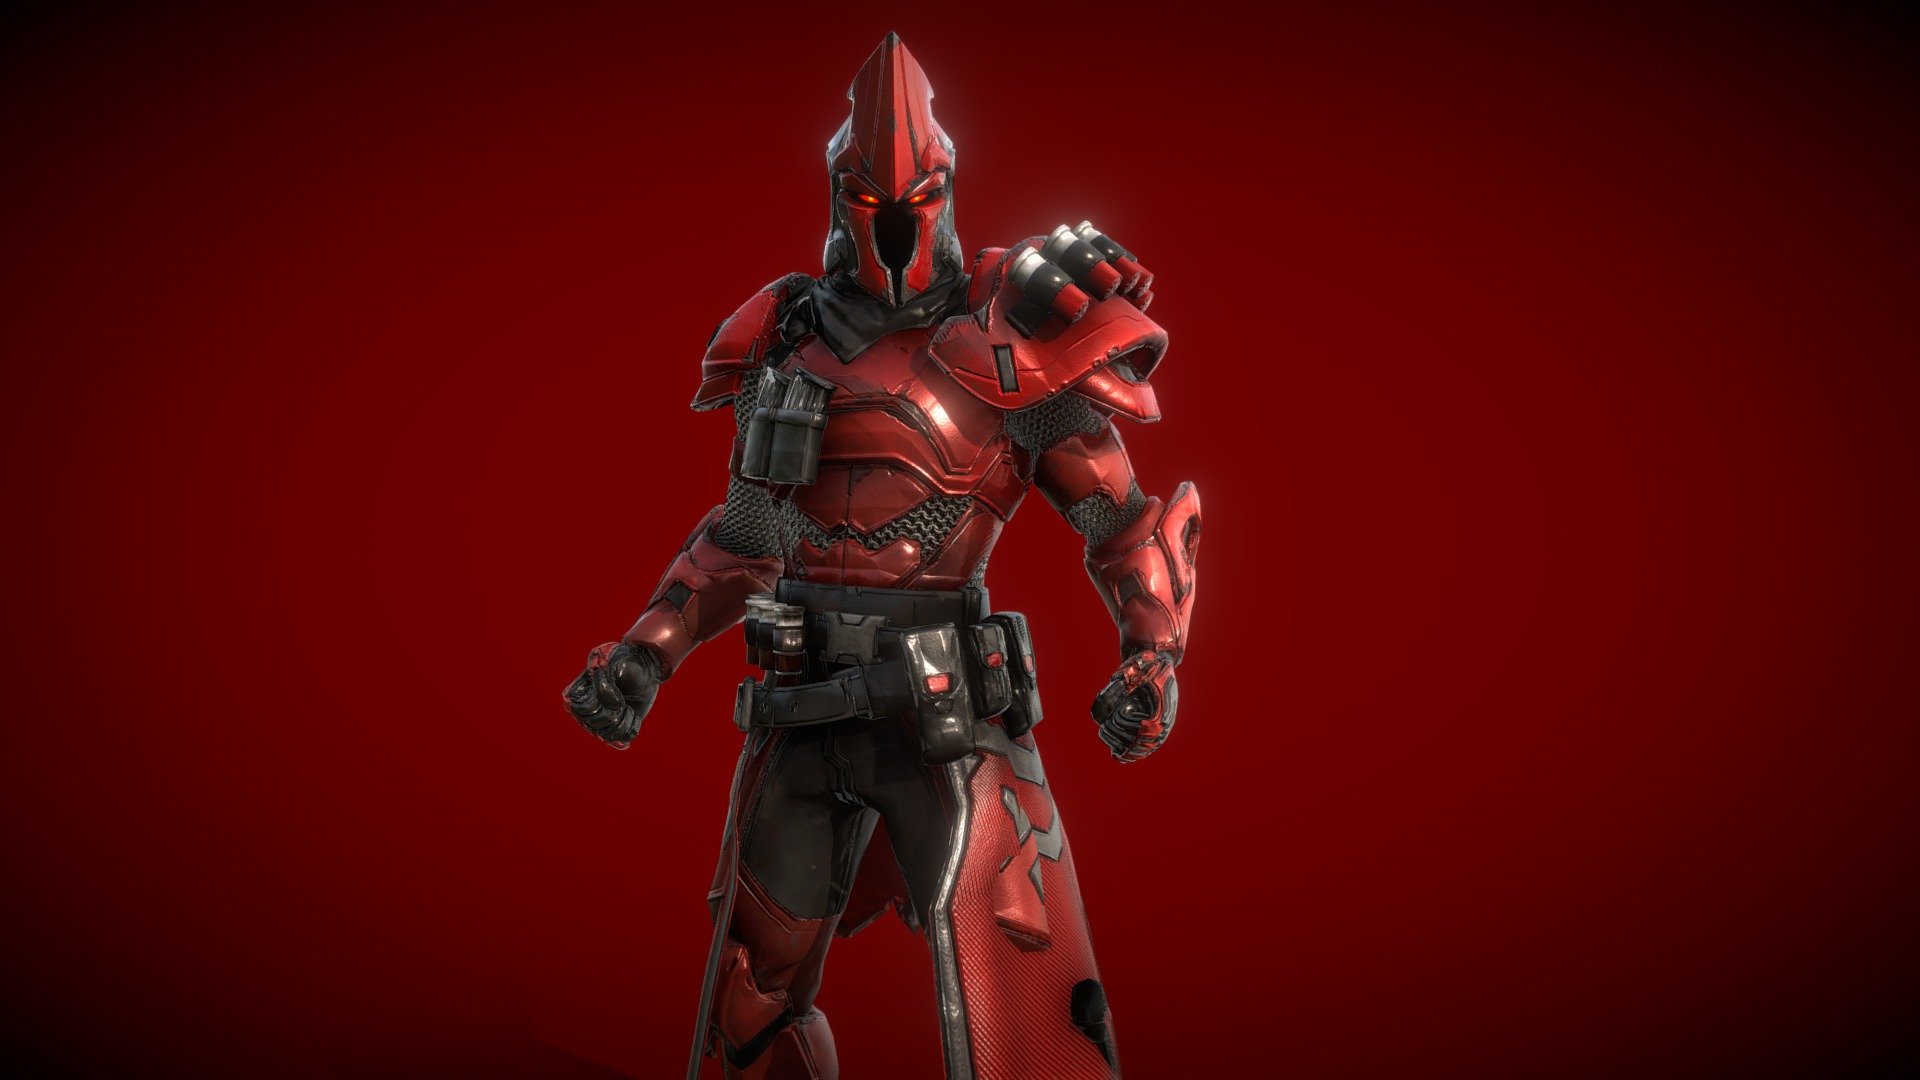 This is the Ultima Knight from Fortnite. And it would be appreticated if you could check out my YT https://www.youtube.com/channel/UCKa3qvqhJFkKAeoLpqZtlJw?view_as=subscriber - Fortnite Ultima Knight 3D Model (UPDATED) - Download Free 3D model by SketchSupreme 3d model